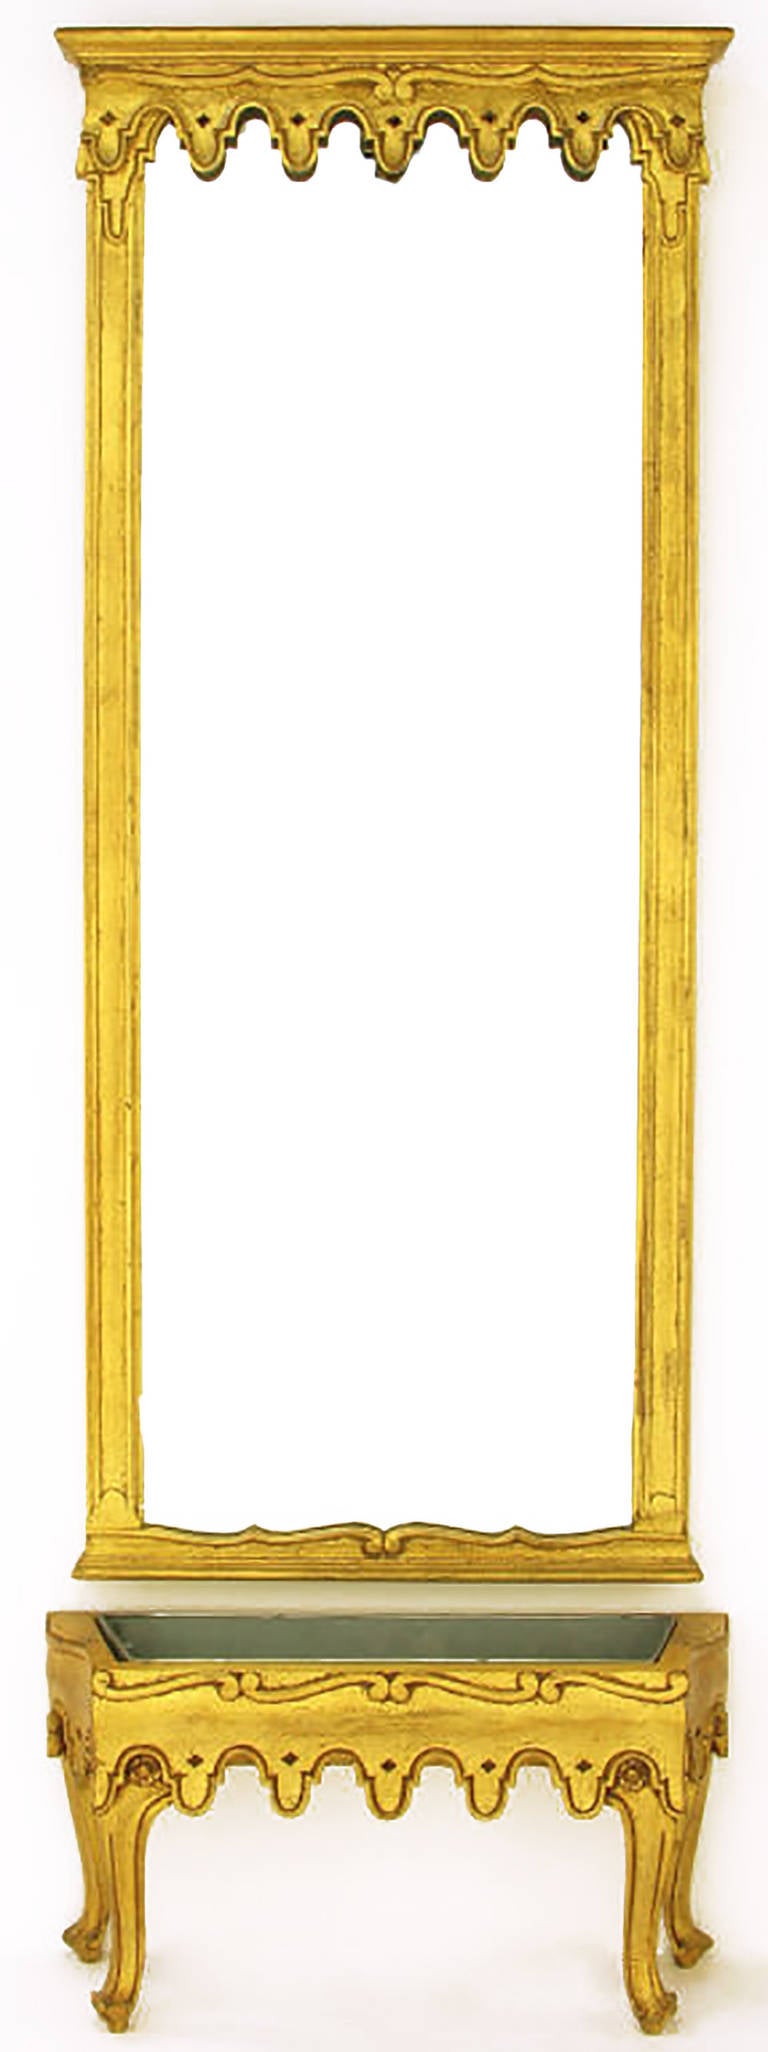 Italian giltwood two-piece pier mirror and concealed jardiniere by La Barge. Classic Italian design with large narrow mirror hung over a footed shelf whose top can be removed to reveal a tin lined jardiniere. Constructed of beautifully gilt and